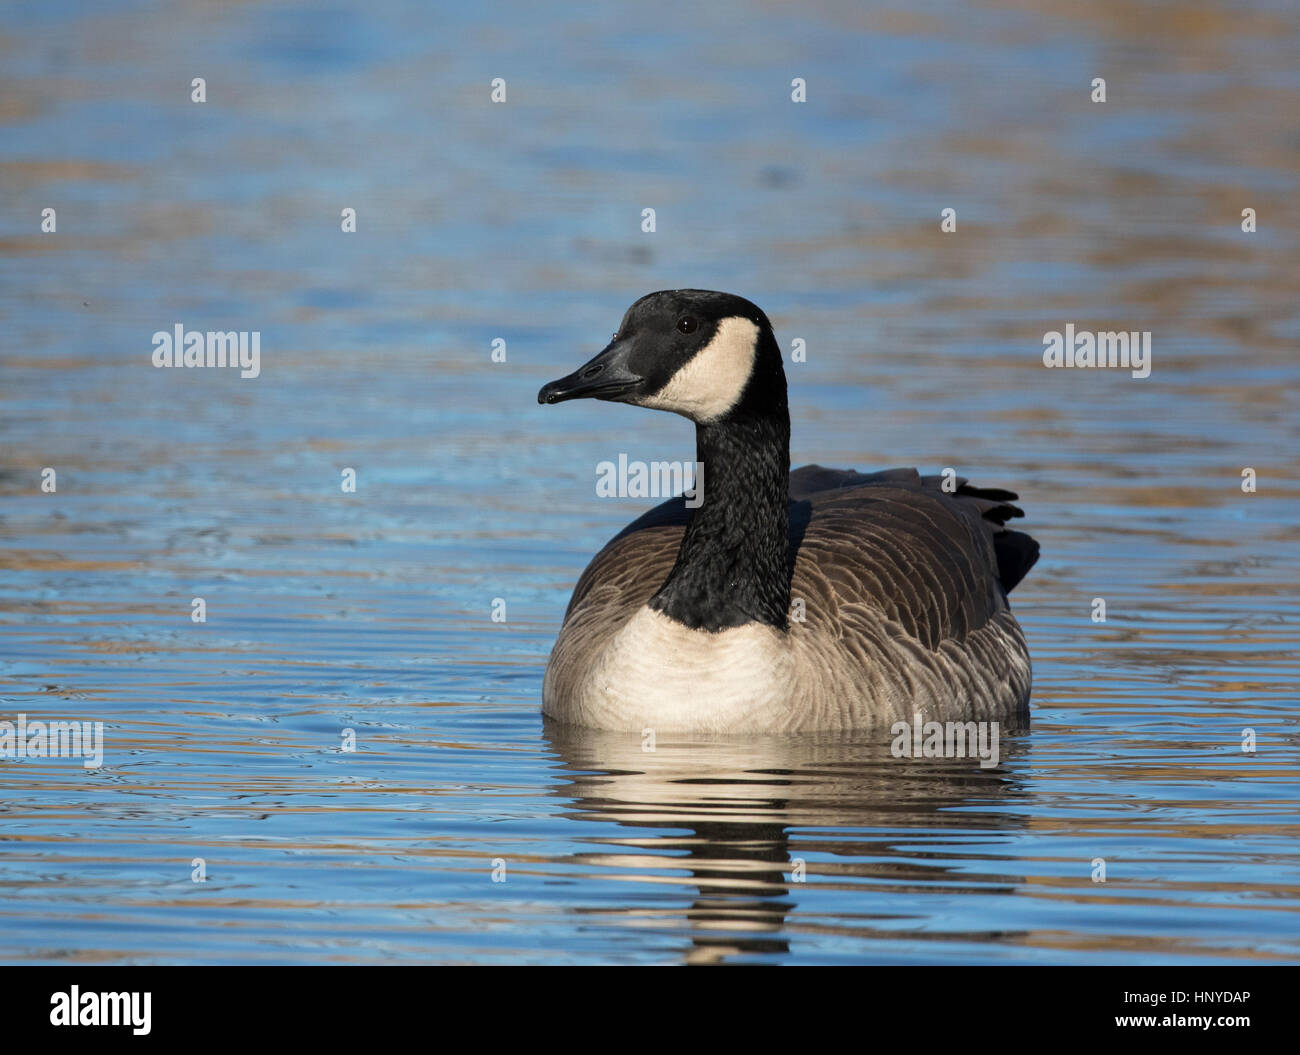 Canada goose floating on water Stock Photo